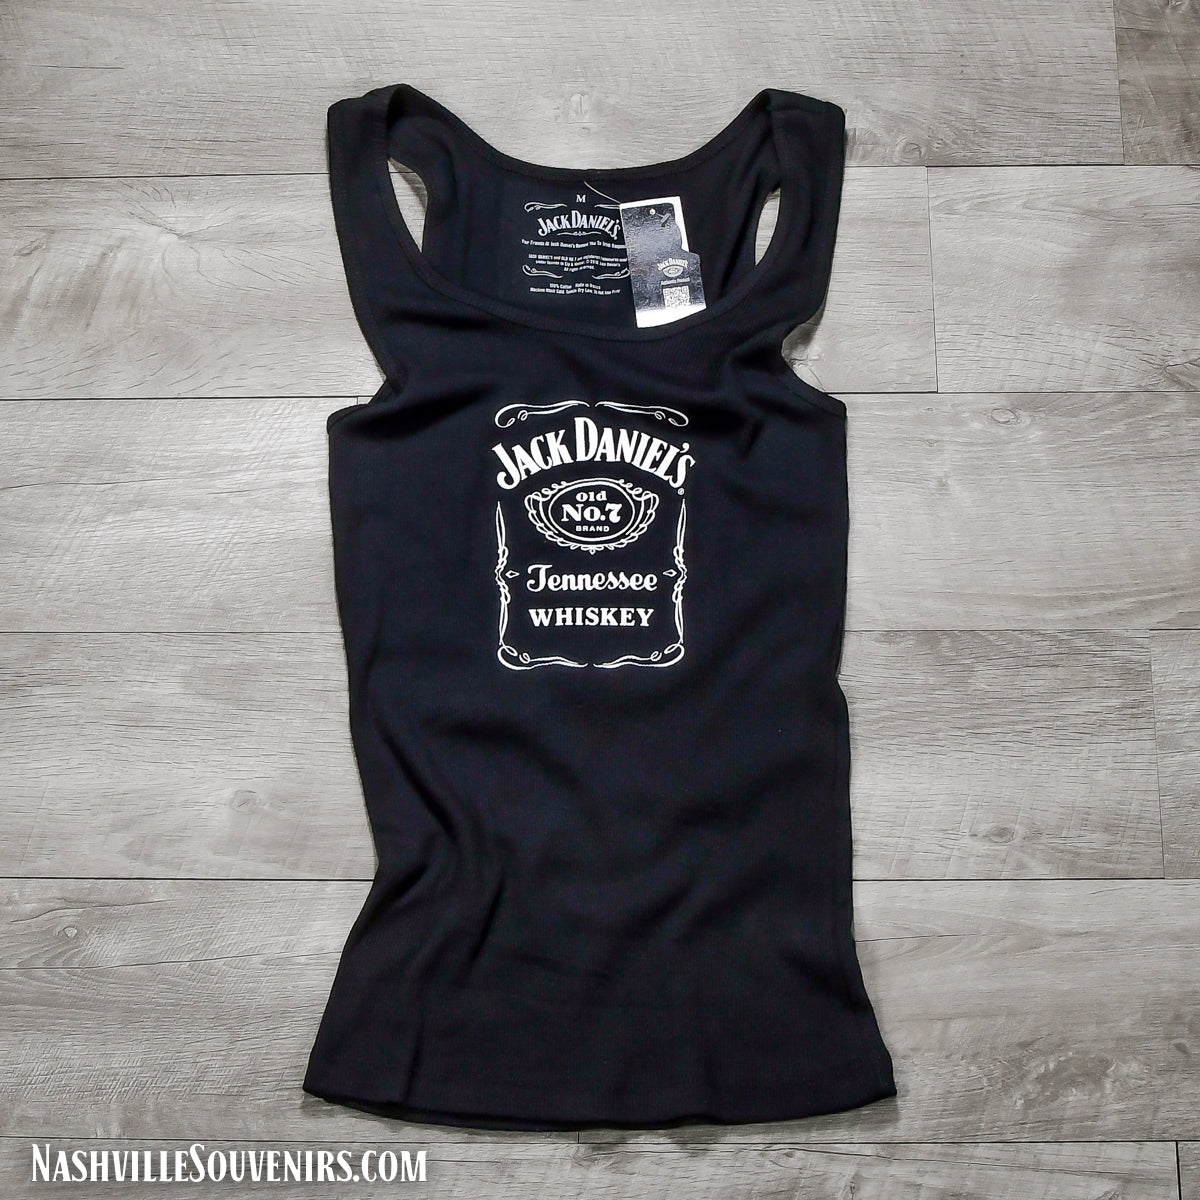 Officially licensed Women's Jack Daniels Old No.7 Label Ribbed Tank Top in black. Get yours today with FREE SHIPPING on all US orders over $75!